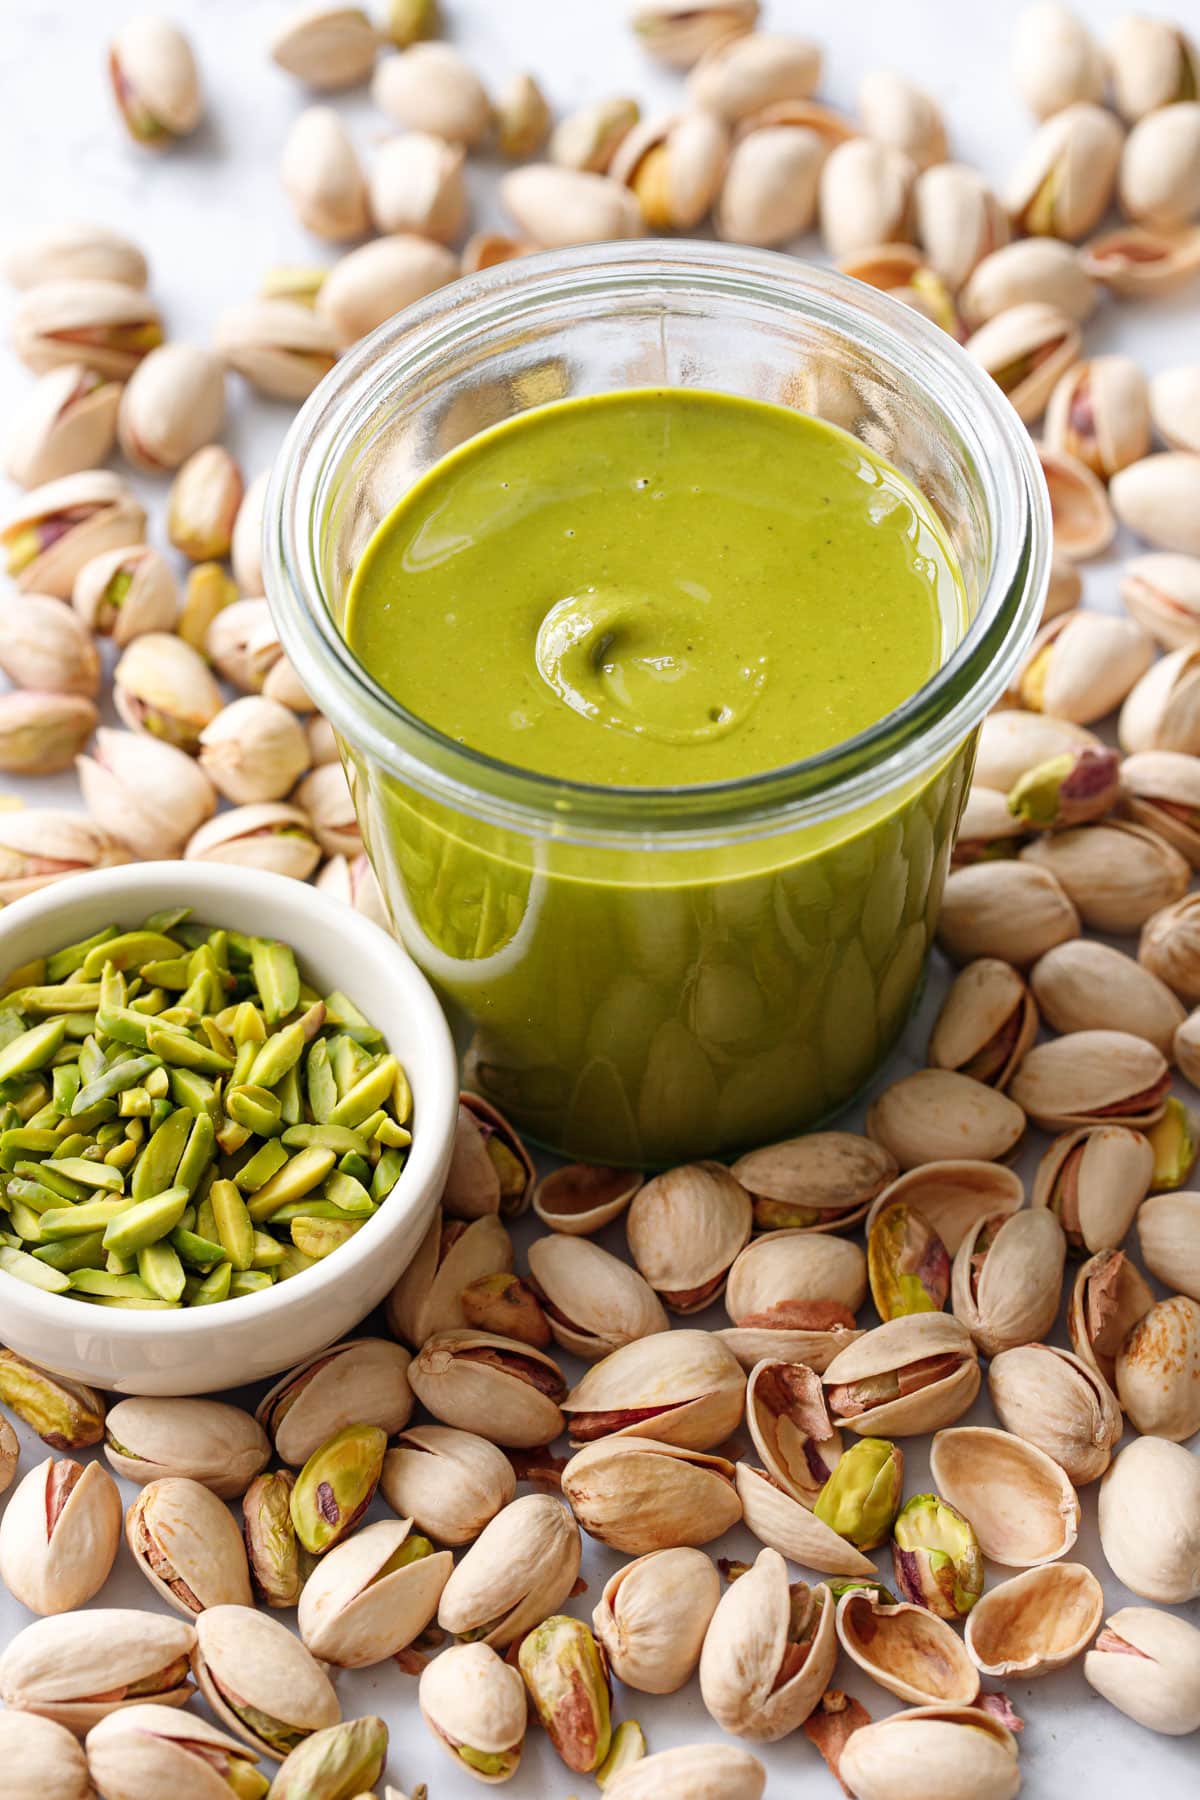 Glass jar of bright green Homemade Pistachio Butter with a bowl of green slivered pistachios, and whole in-shell pistachios scattered around.